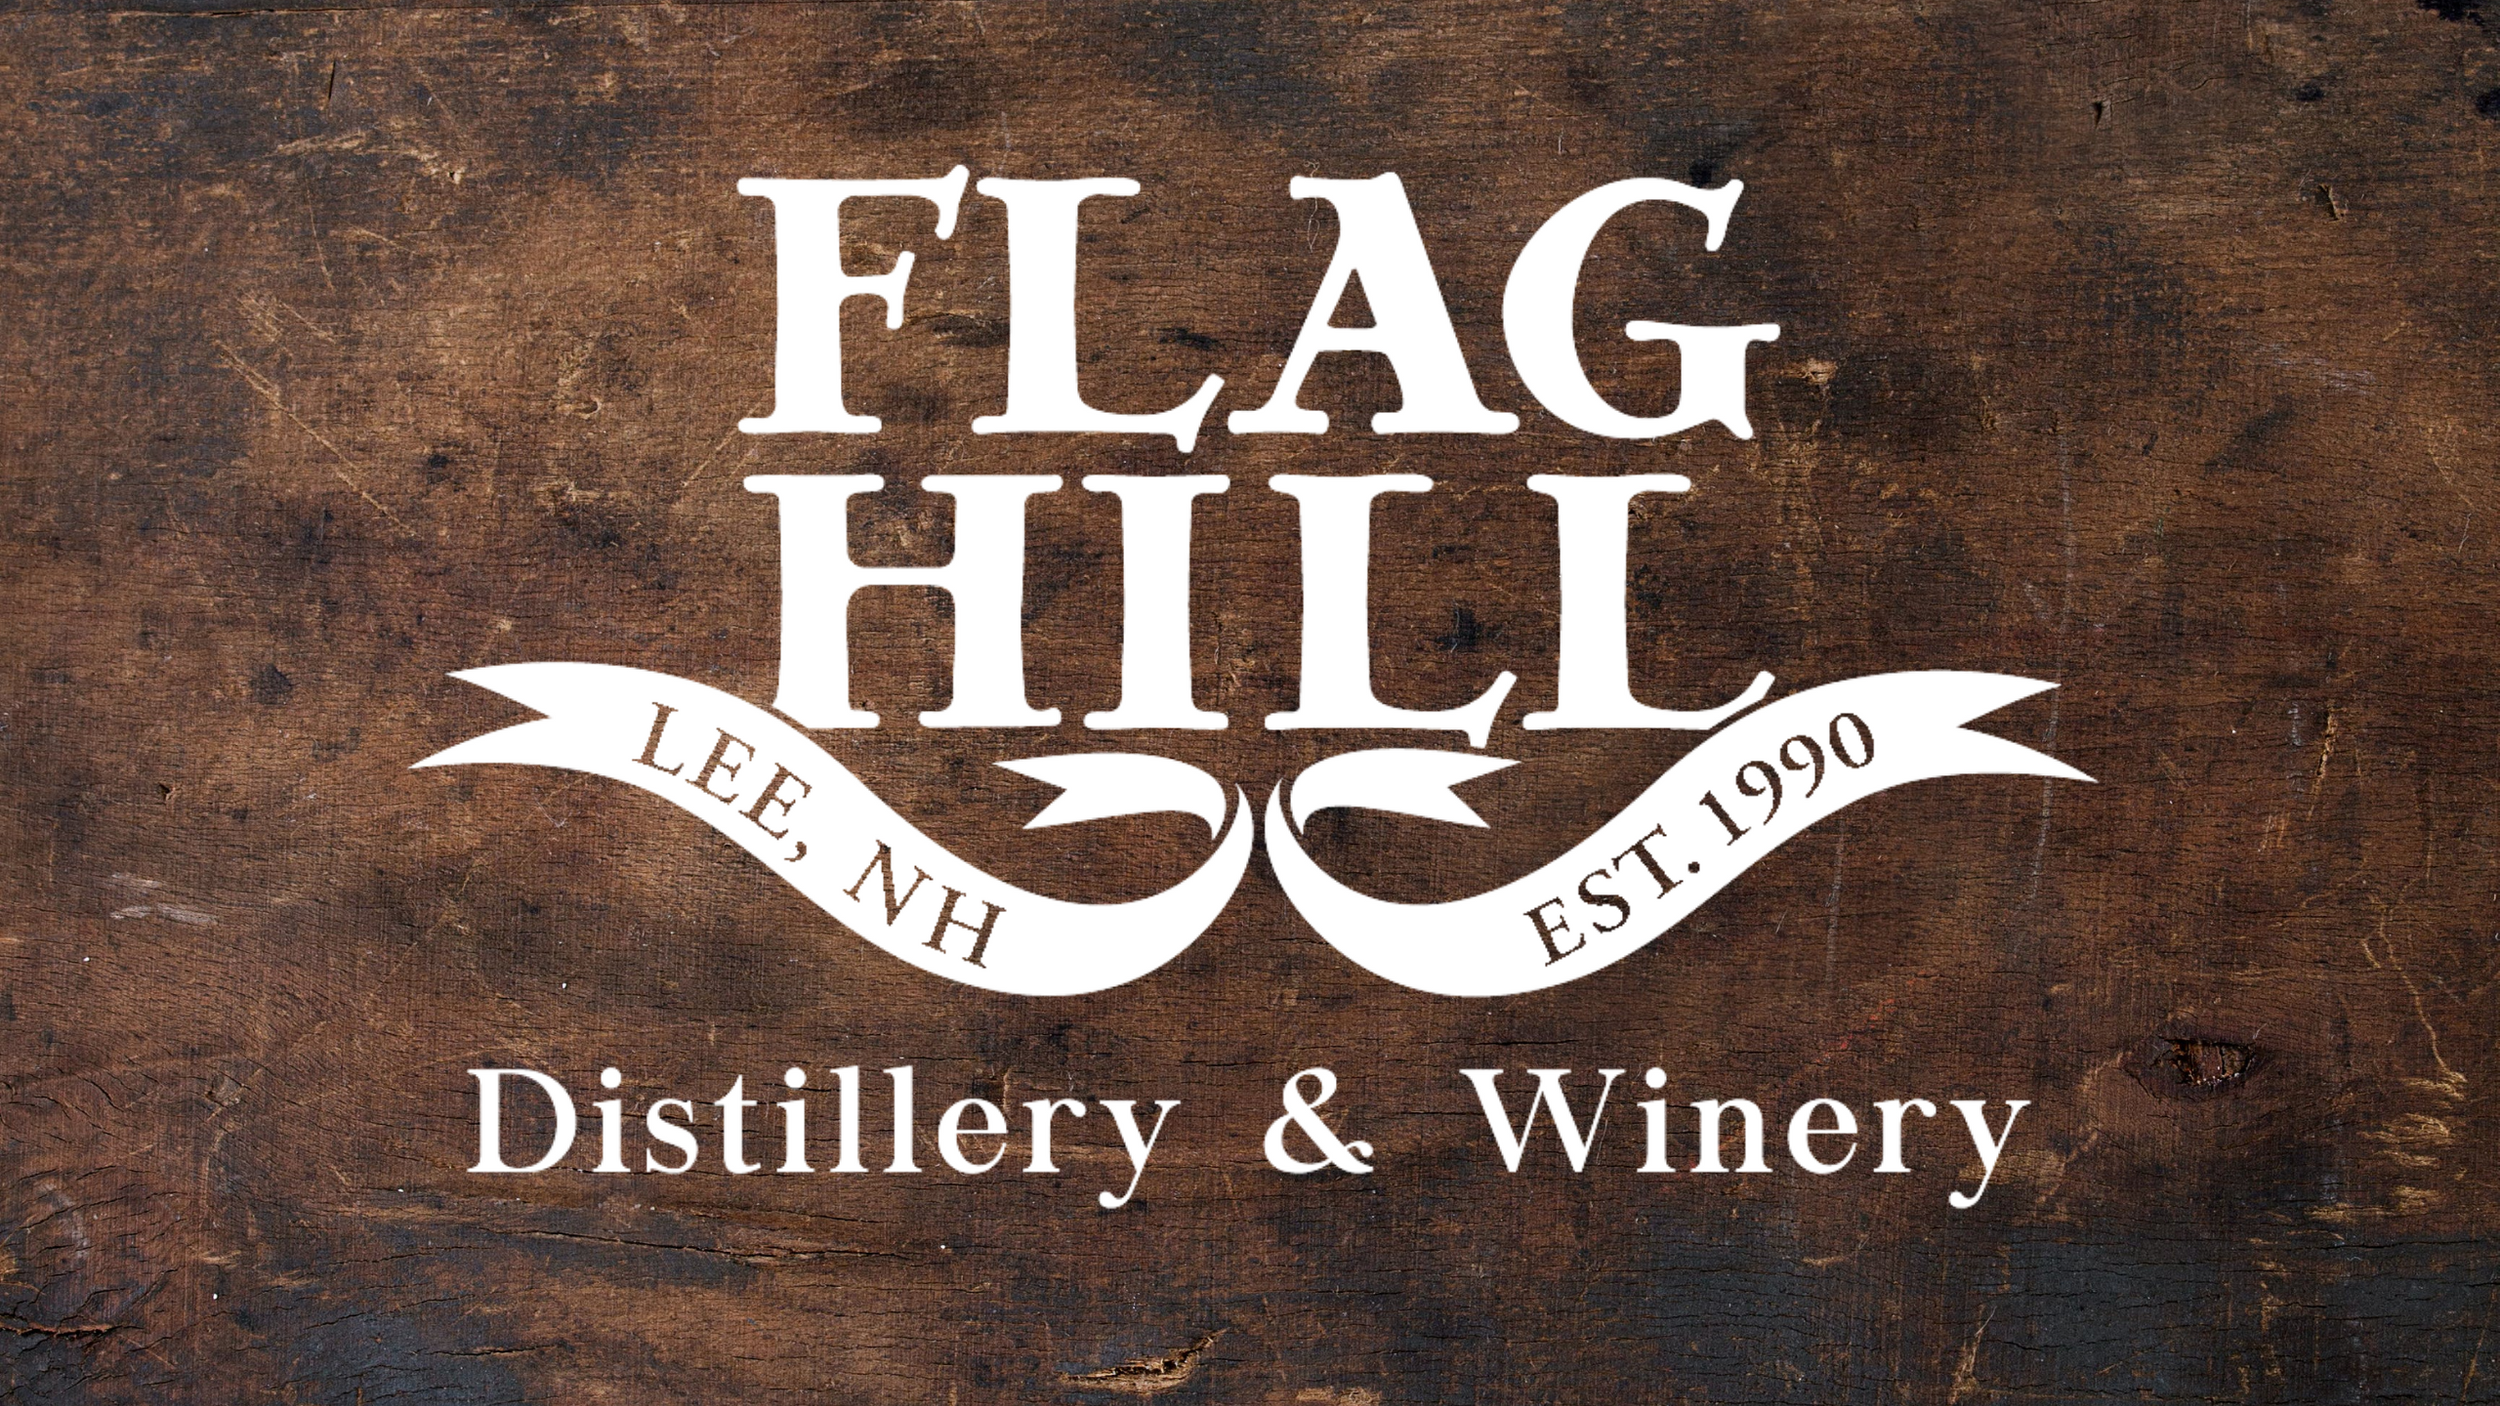 Flag Hill Winery